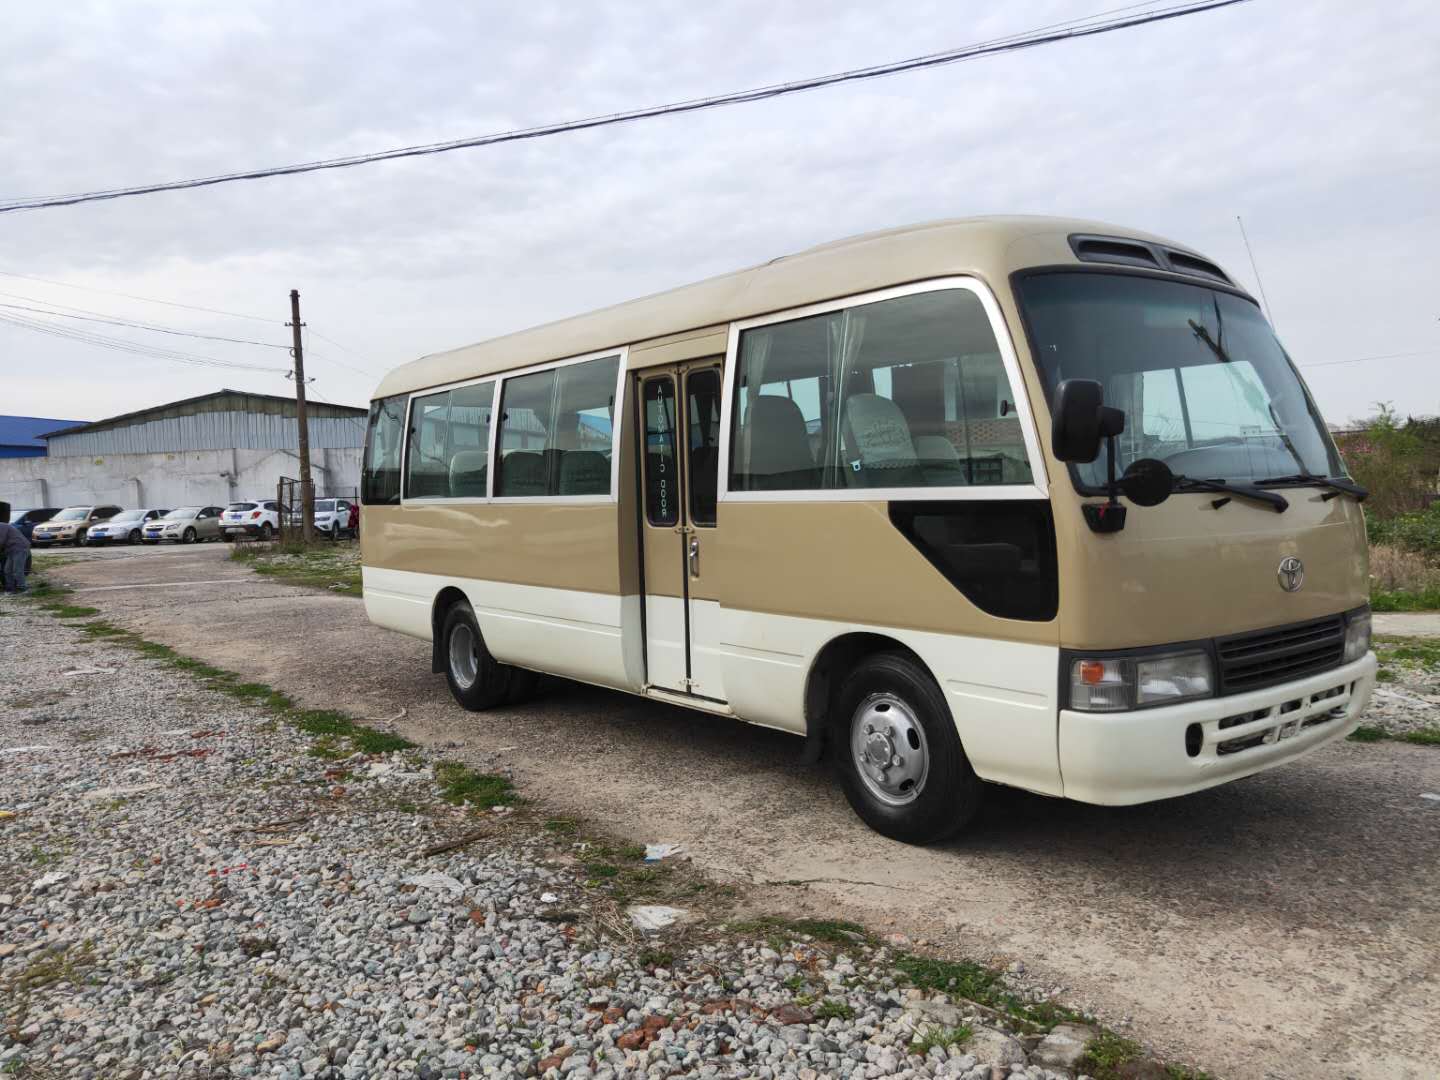 Quality LHD 2016 second hand /used toyota coaster mini coach for sale with 30 seats for sale